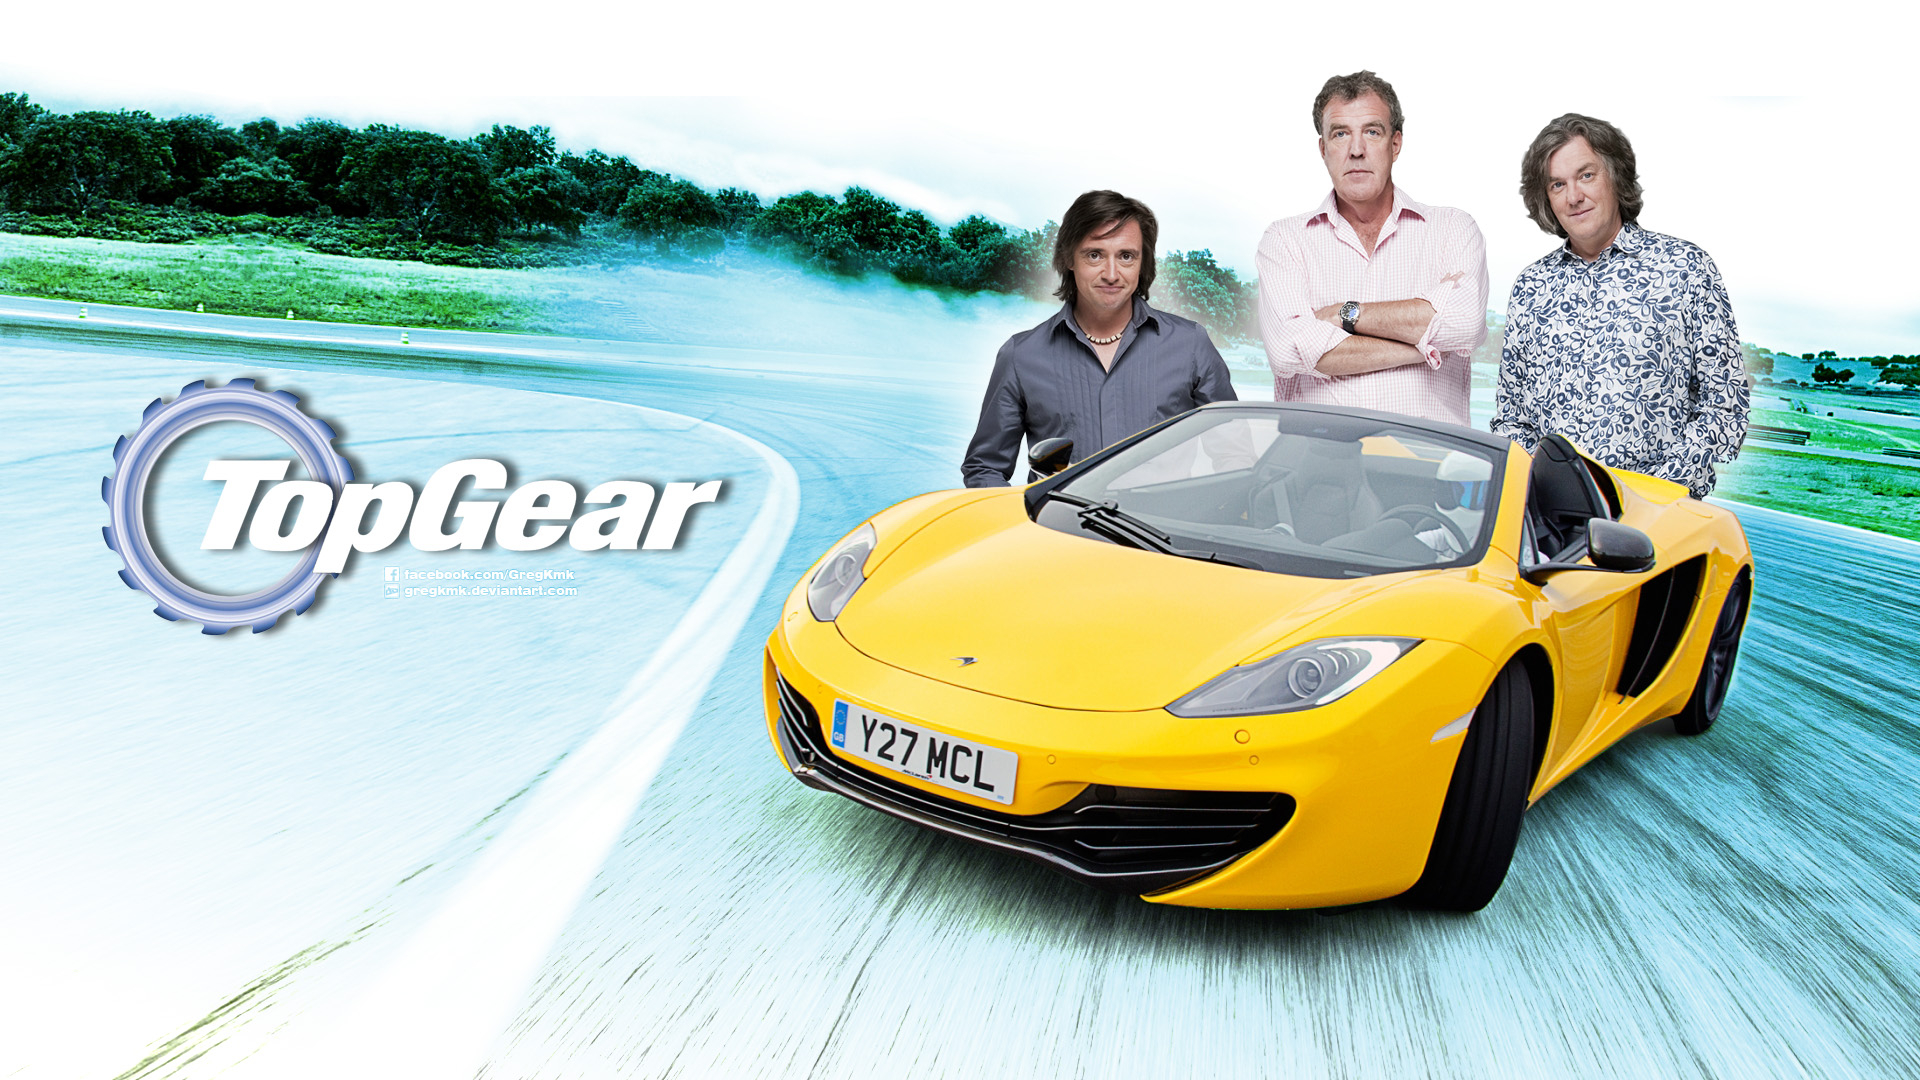 1920x1080 140+ Top Gear HD Wallpapers and Backgrounds